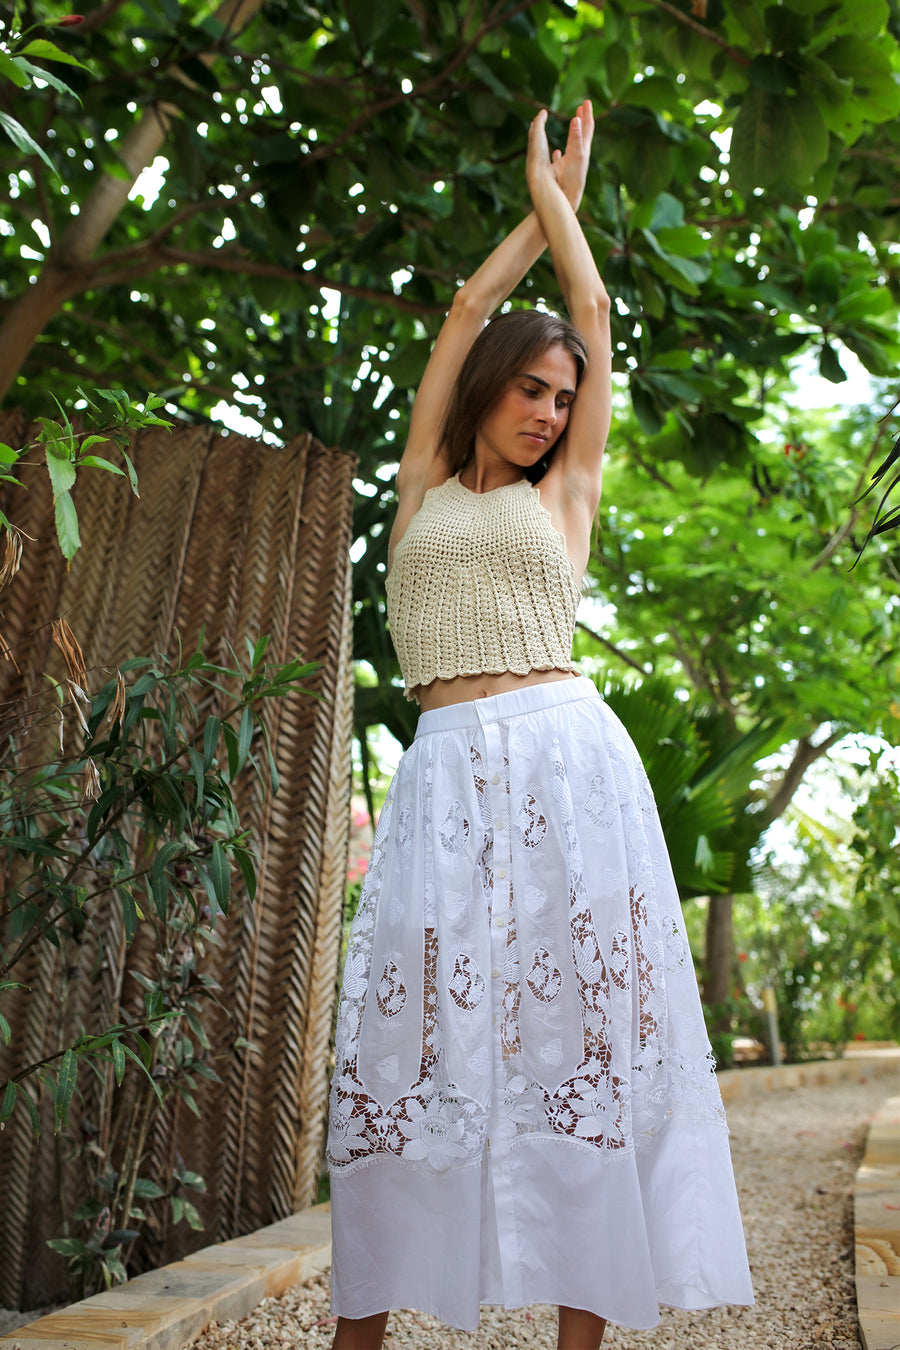 This is a photo of a woman wearing a long white skirt with lace detailing. There are buttons that go down the center and lace that creates an intricate pattern around. 